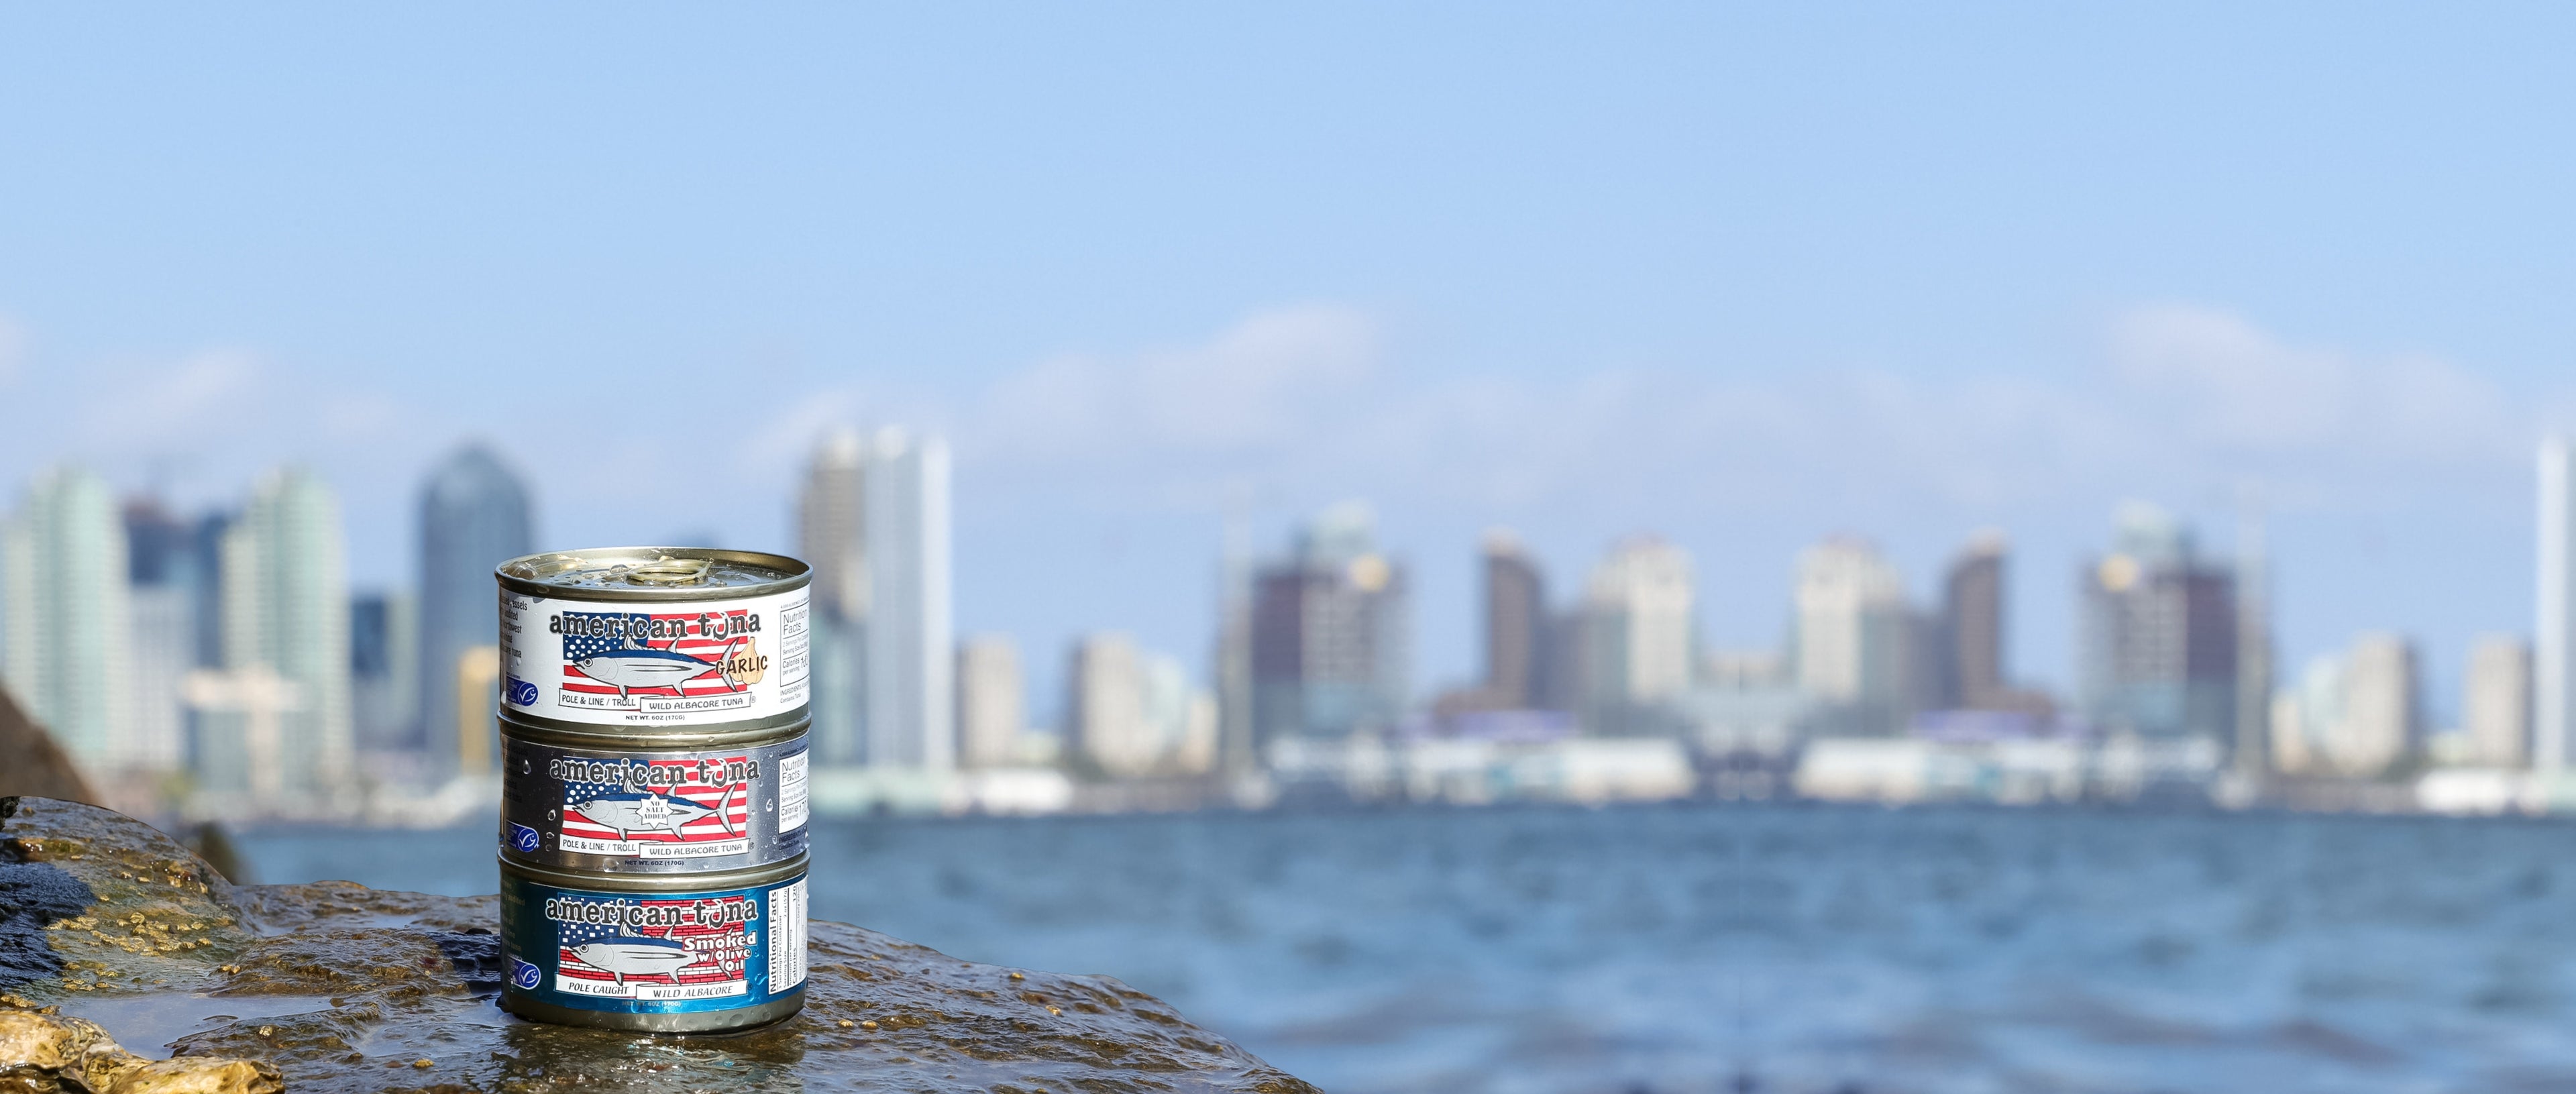 Photo of American Tuna can in front of San Diego skyline